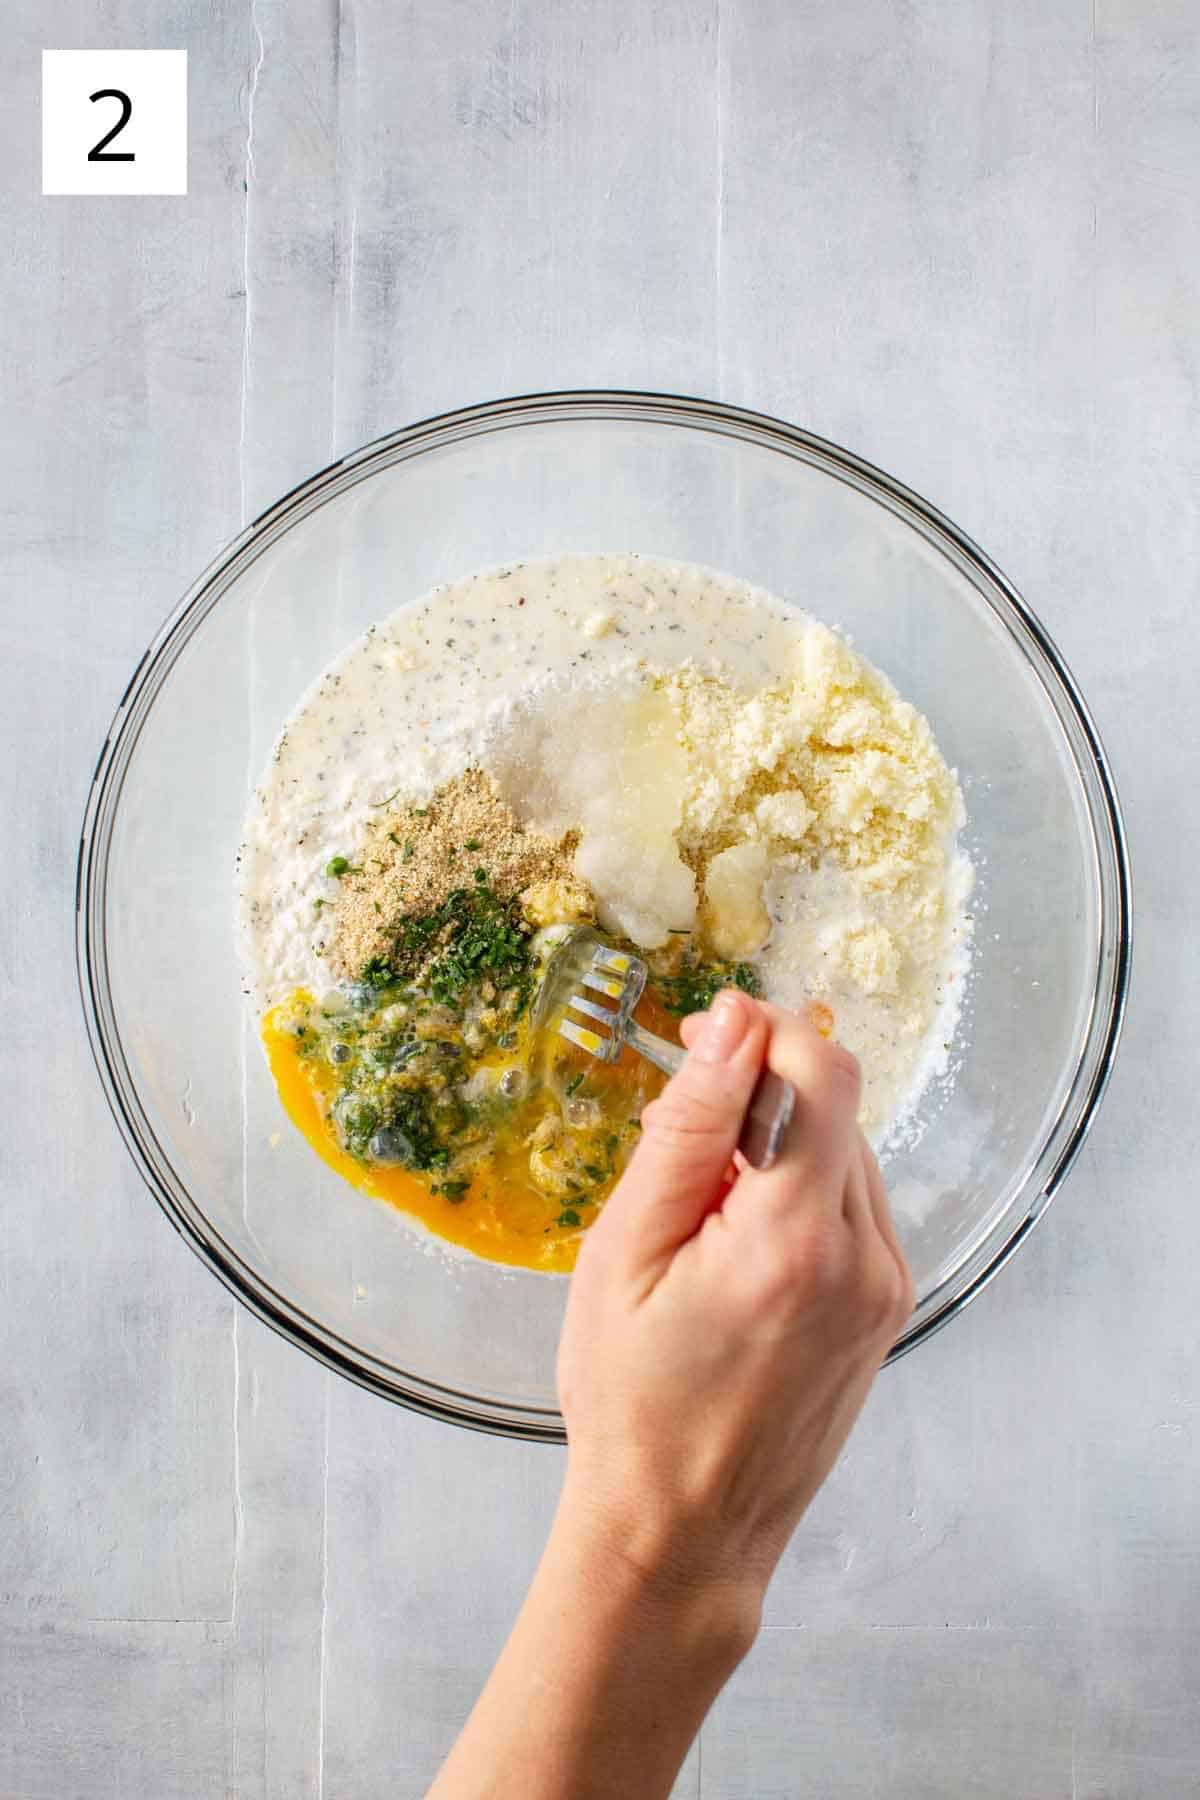 Mixing together breadcrumbs, salt, grated cheese, parsley, milk and eggs.